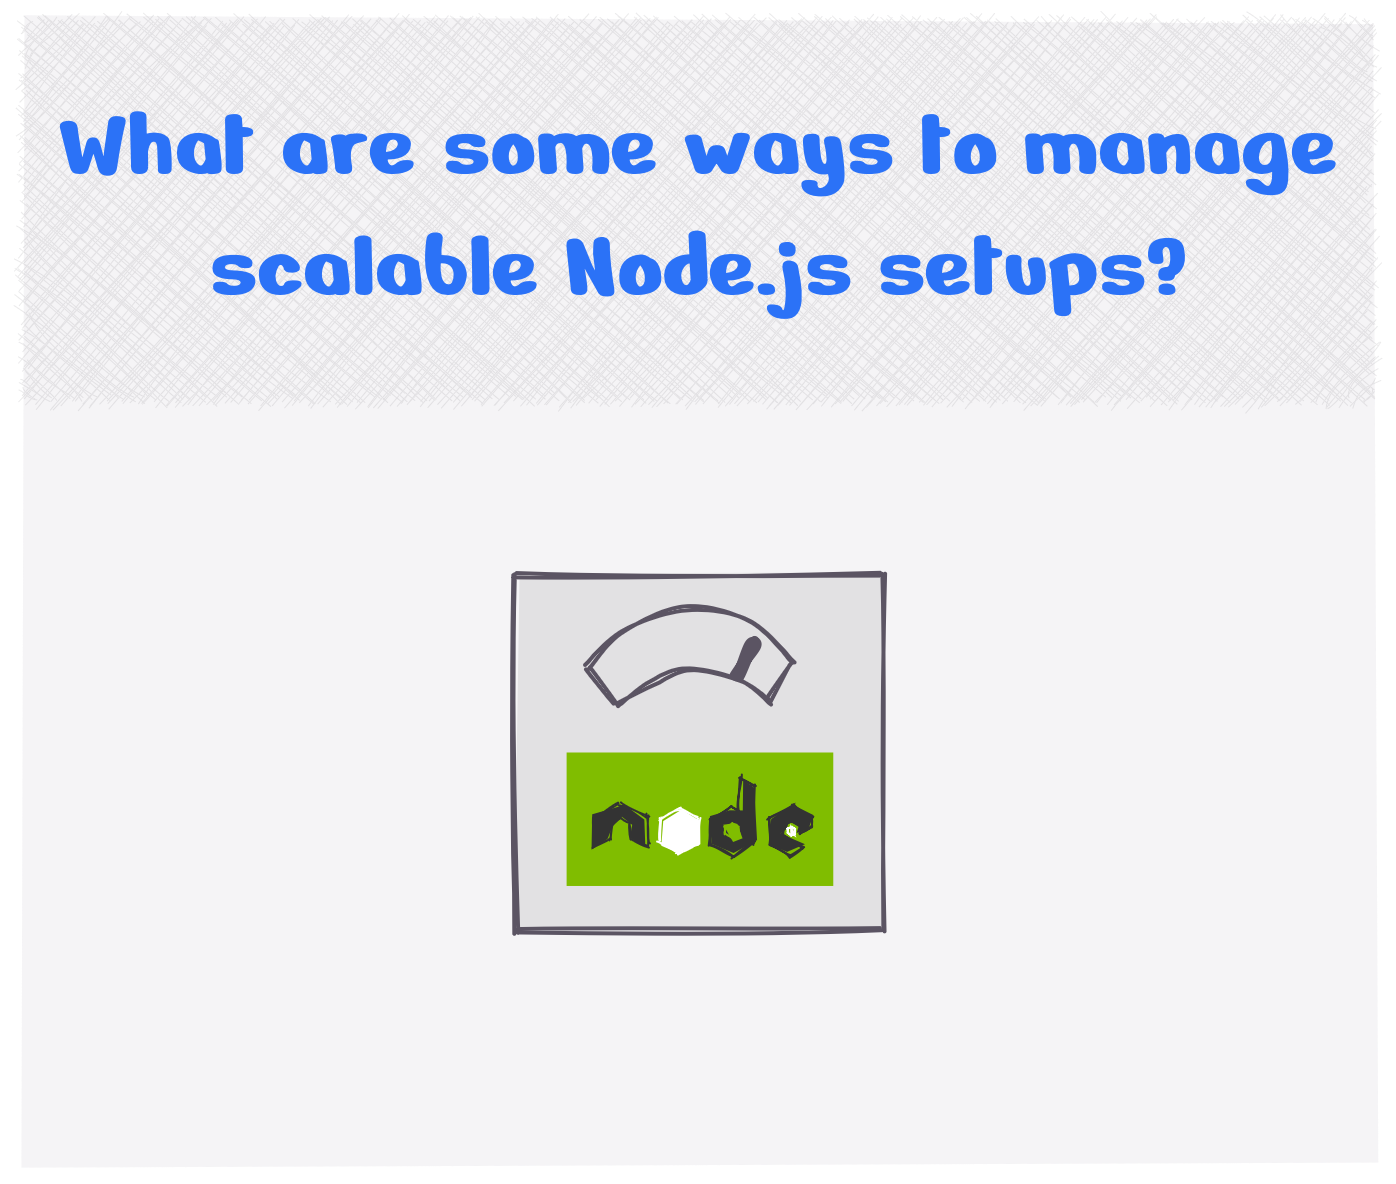 What are some ways to manage scalable Node.js setups?